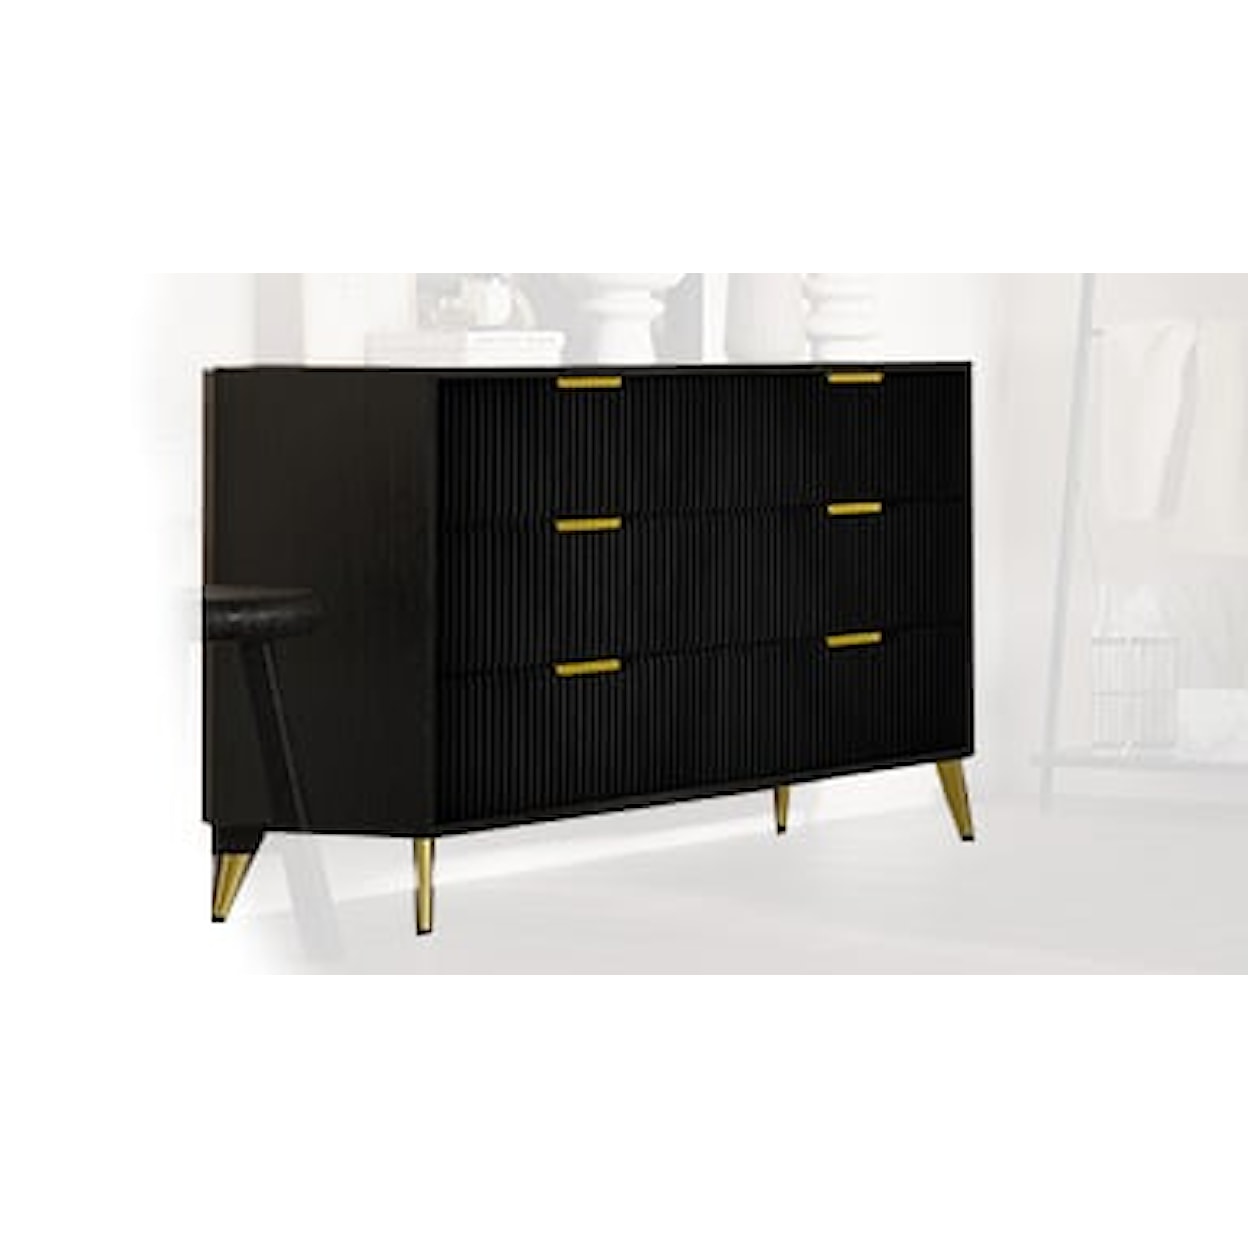 New Classic Furniture Kailani Dresser with 6 Drawers